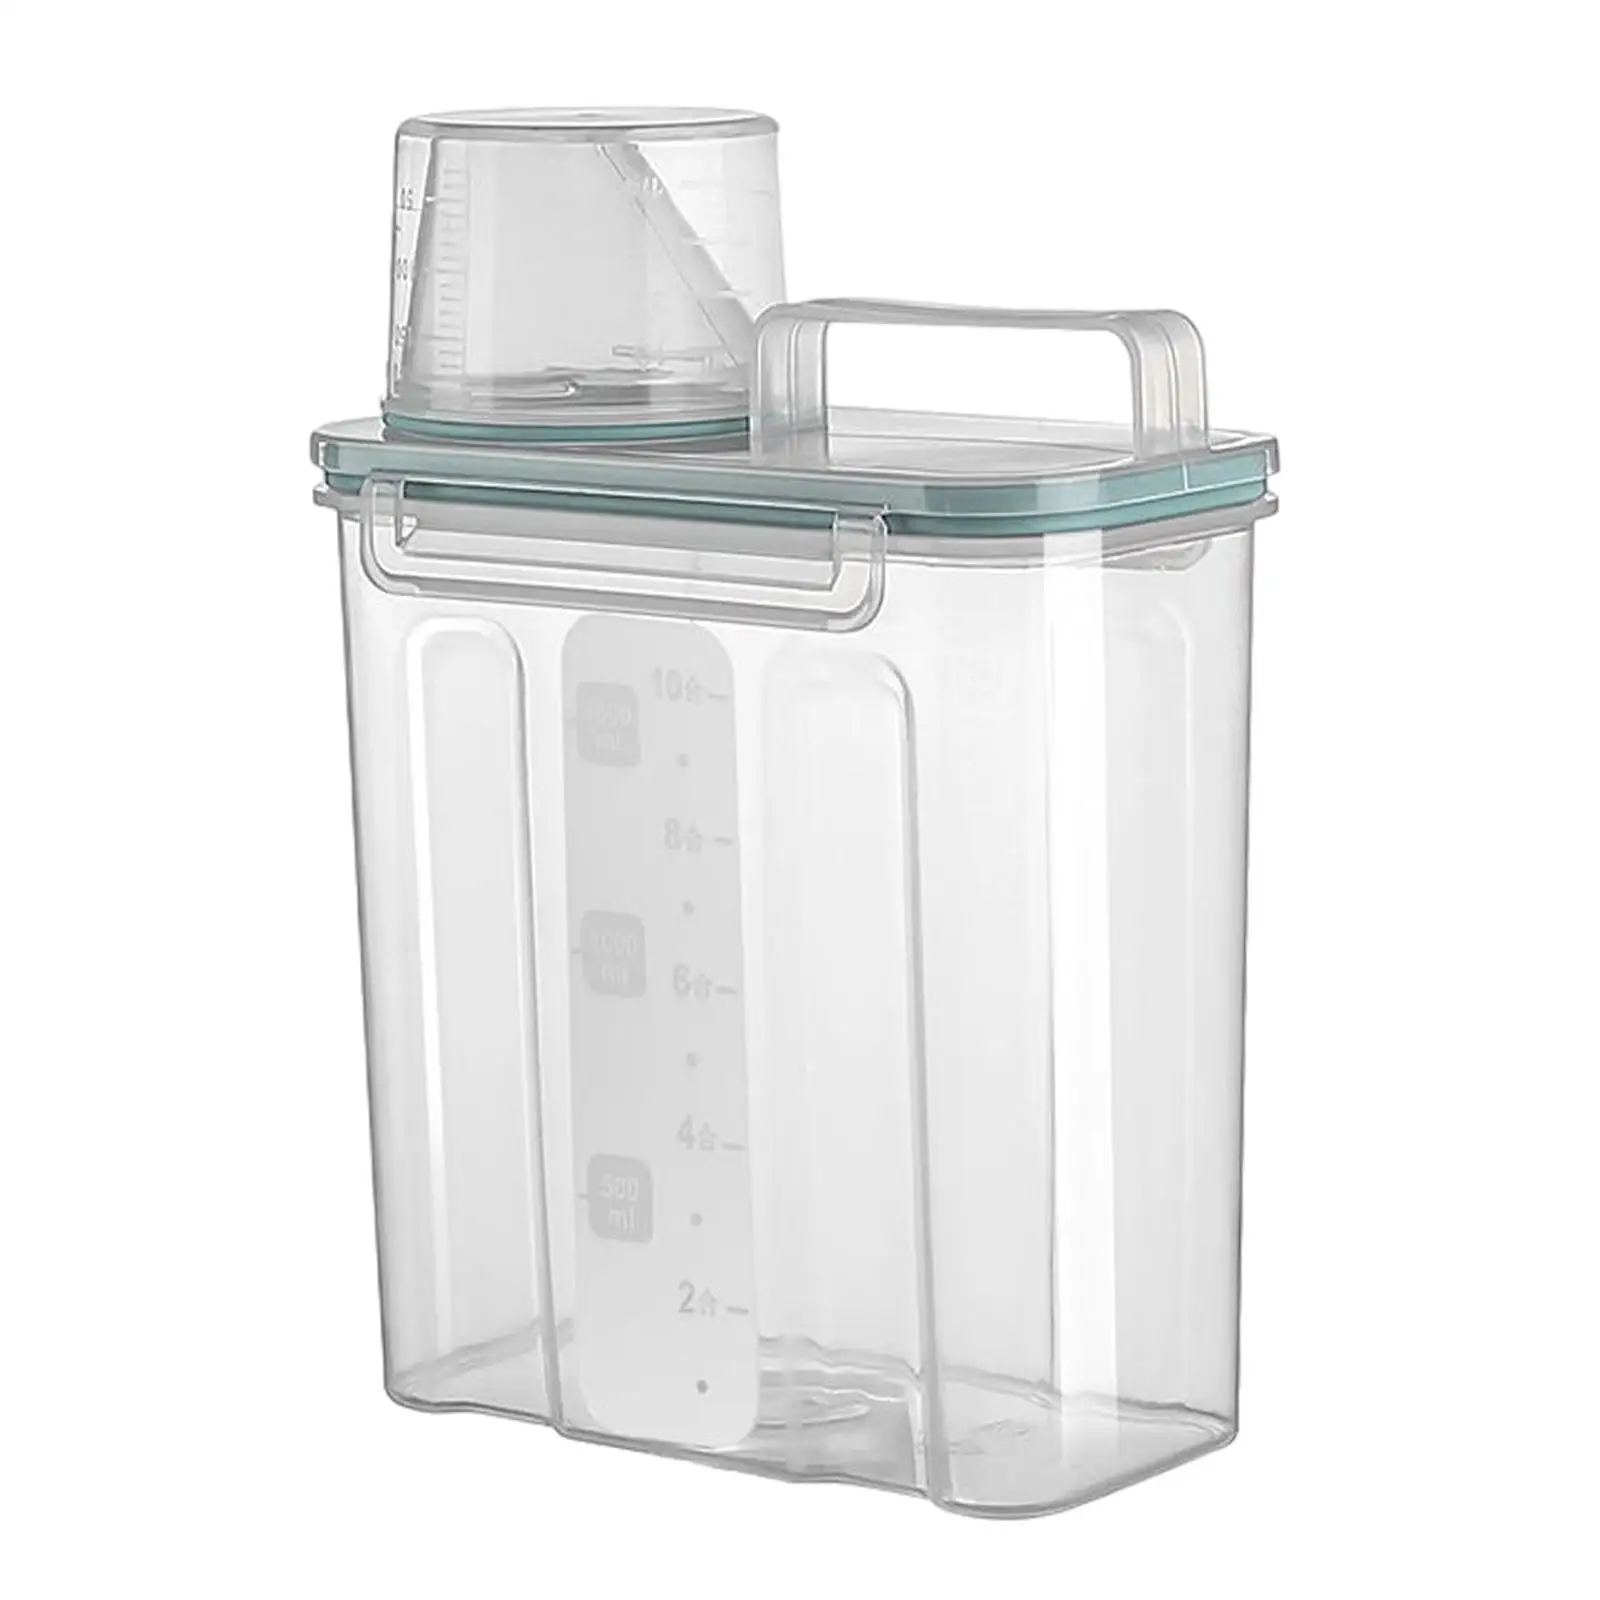 Laundry Detergent Holder with Lids Farmhouse Transparent Laundry Room Organization Multifunctional with Scale Rice Dispenser